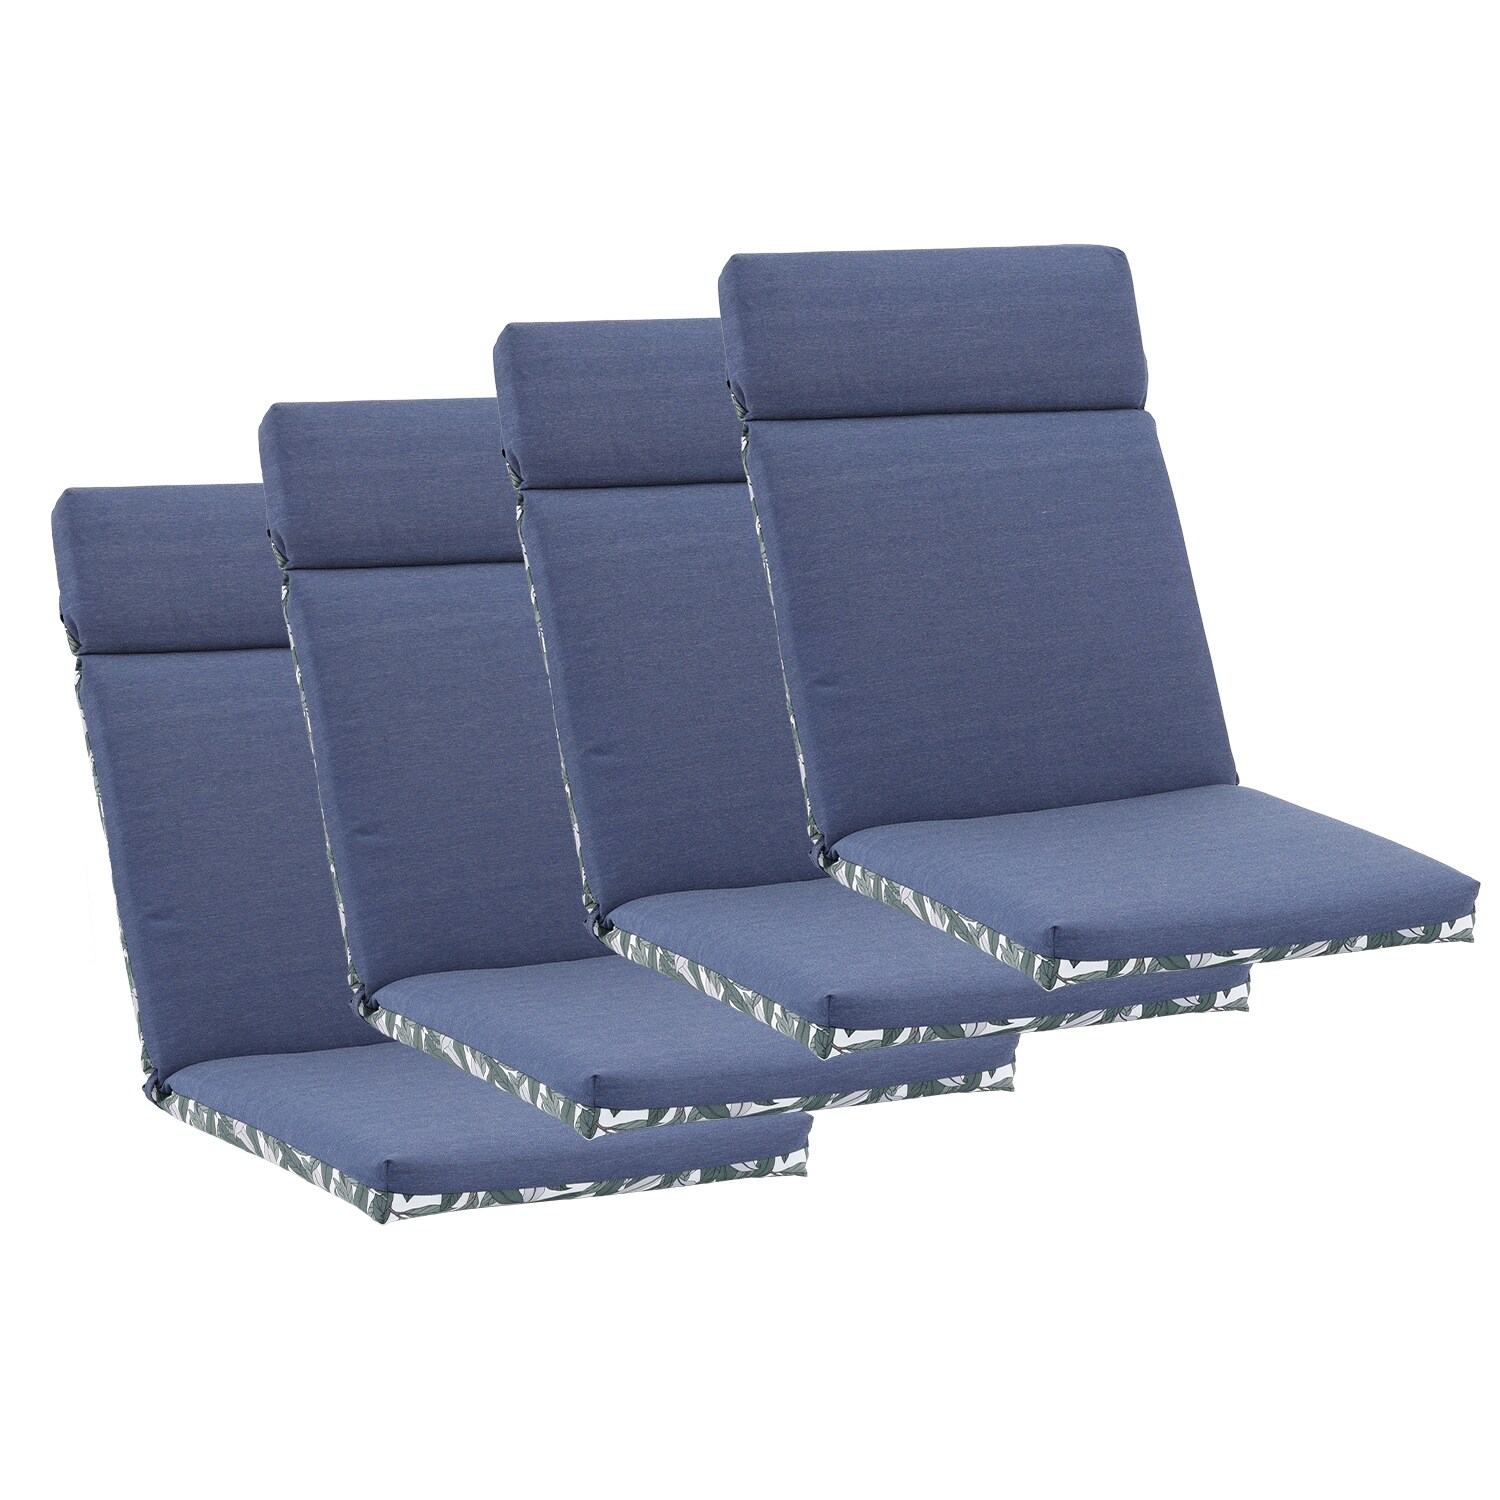 https://ak1.ostkcdn.com/images/products/is/images/direct/bfac1a321b0fc4a0bbc9e7917f5b349021c89c23/Aoodor-Indoor-Outdoor-High-Back-Chair-Cushions-Set-of-4.jpg